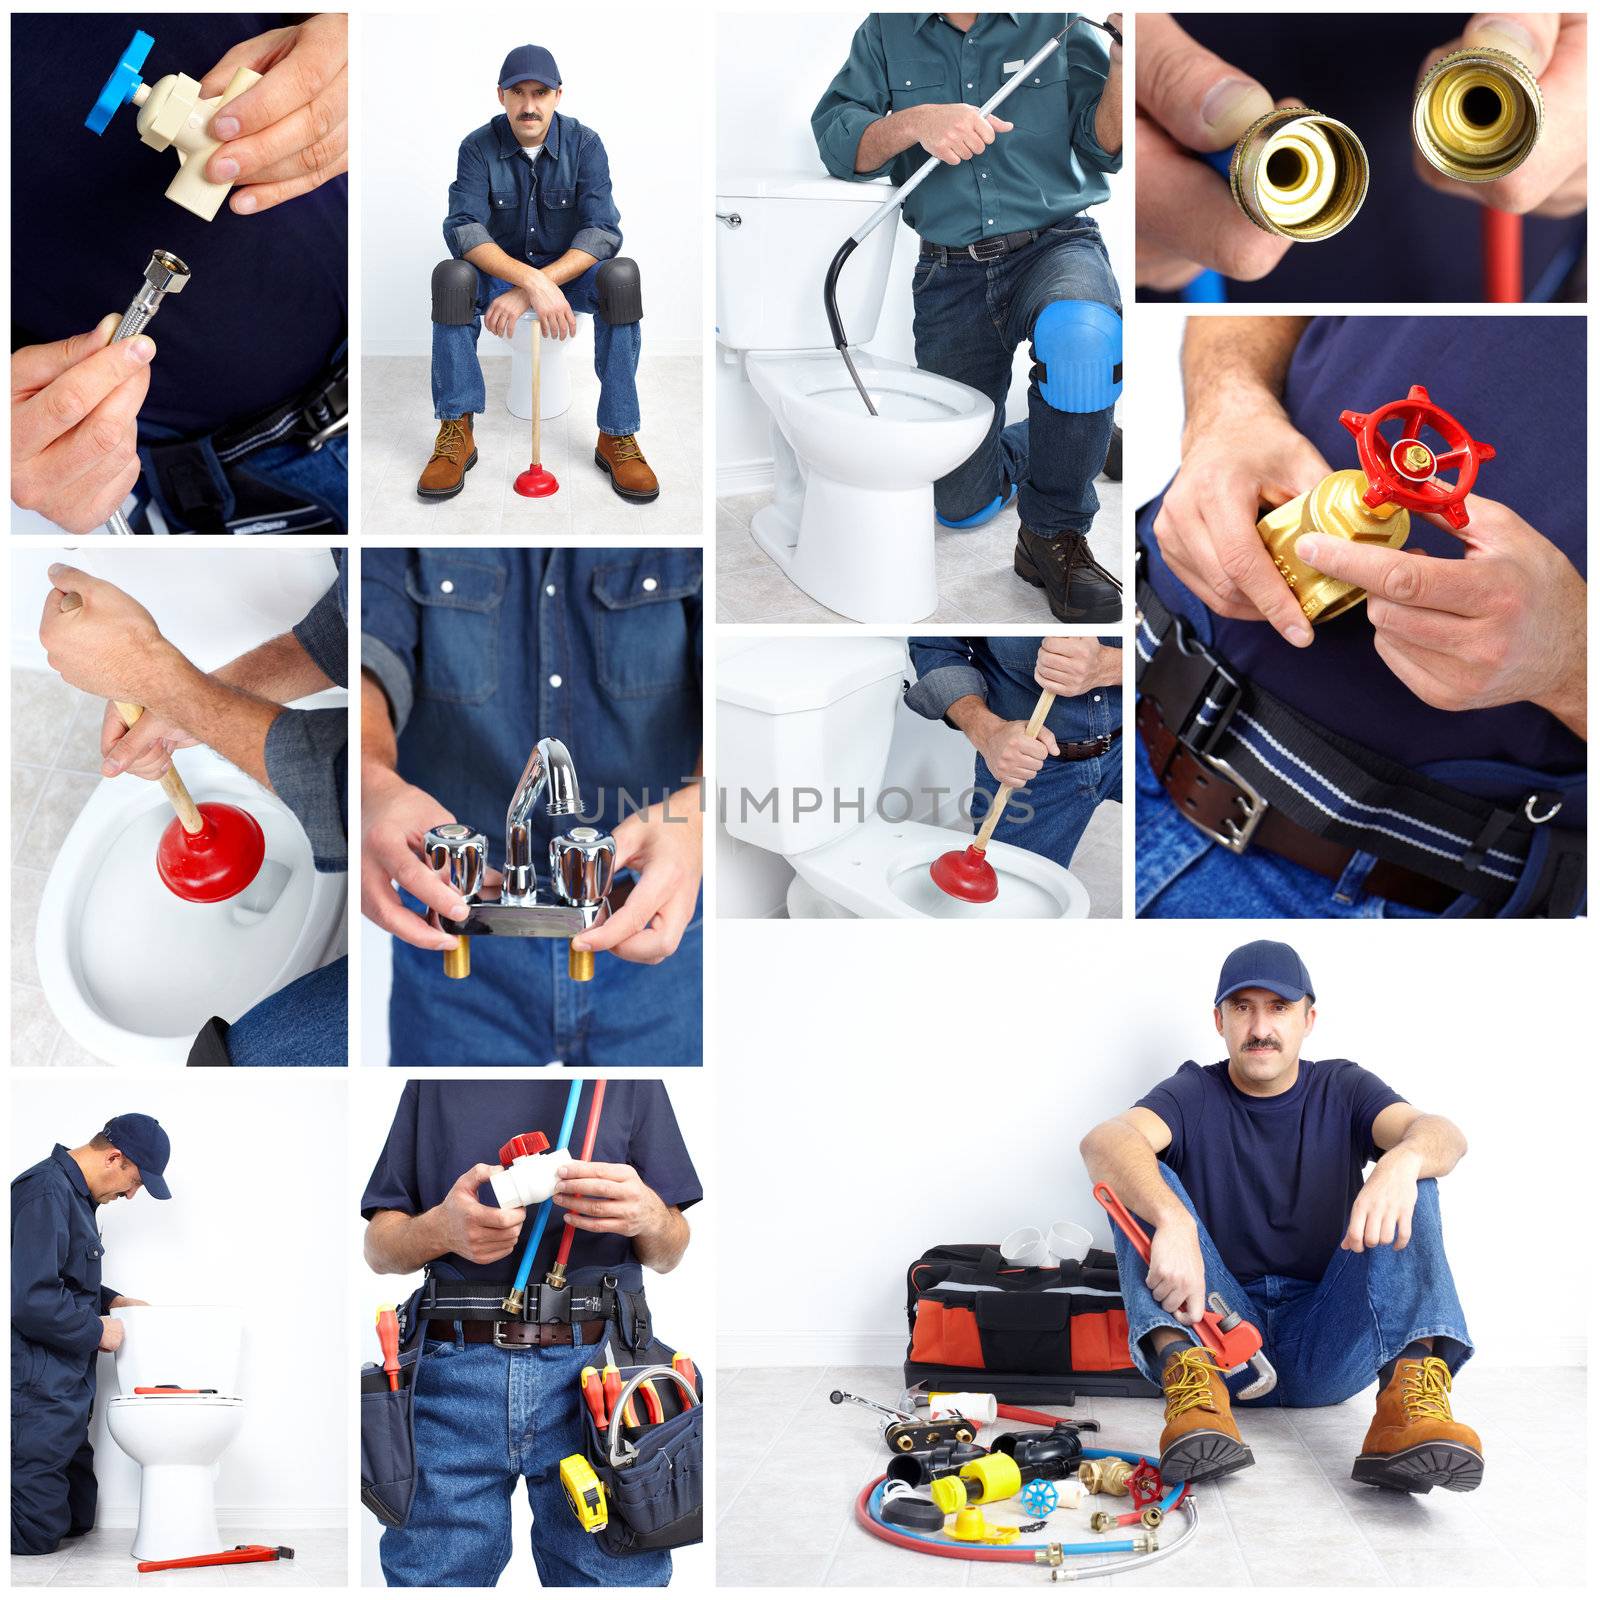 Plumber with a toilet plunger and details. Worker people